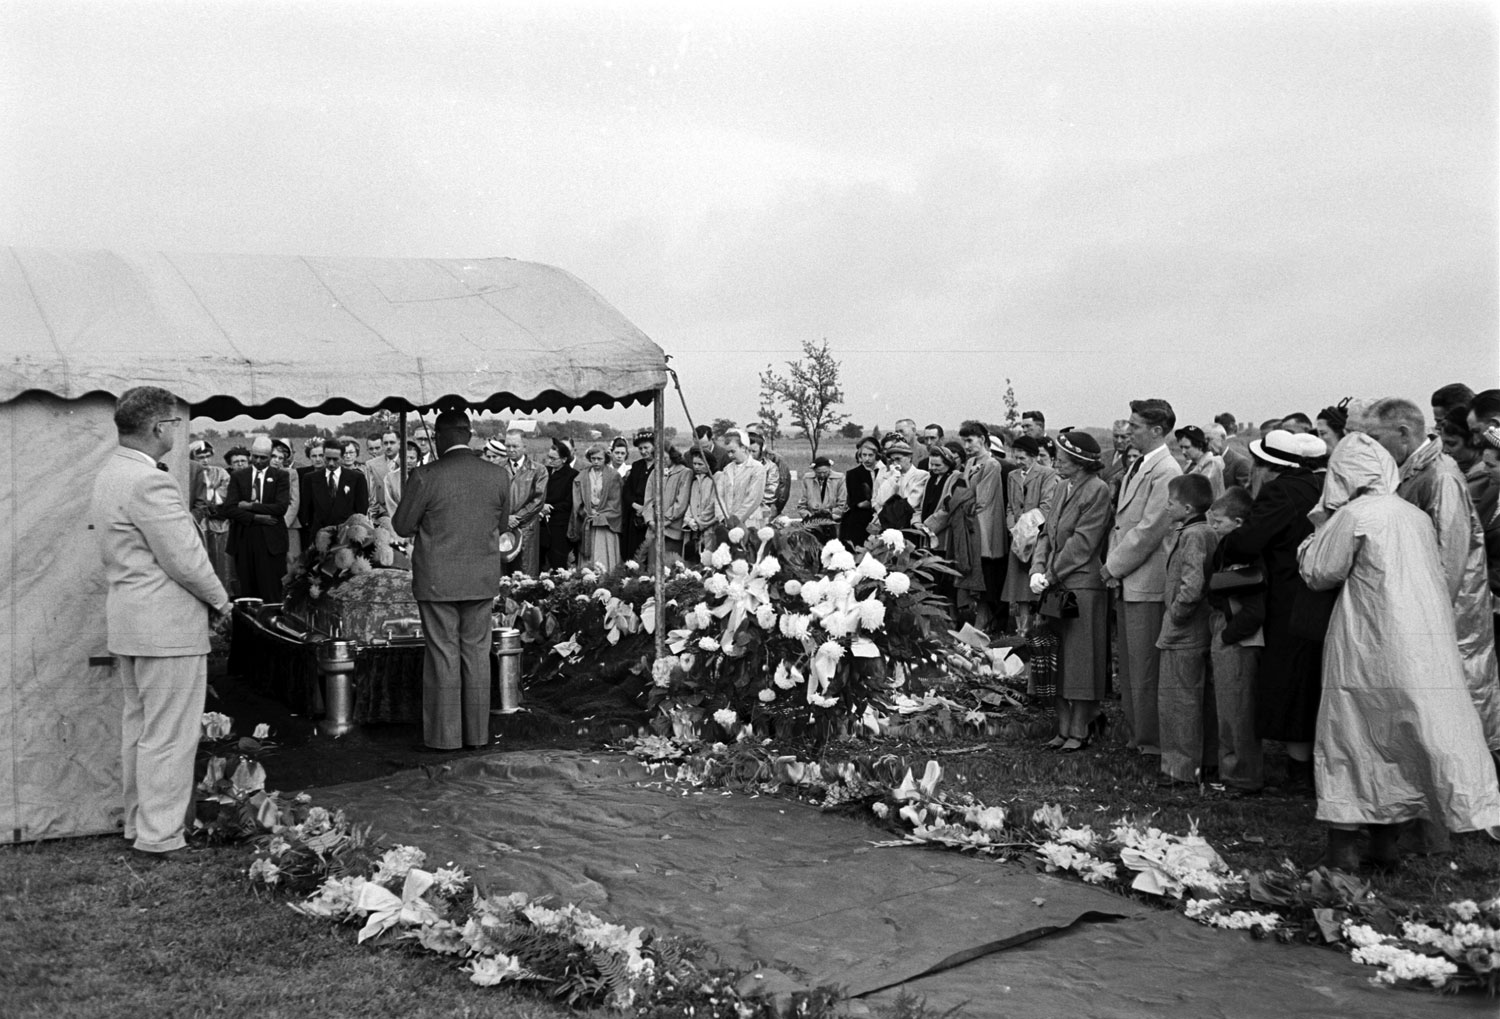 Funeral following the May 11, 1965, tornado that killed 114 people.